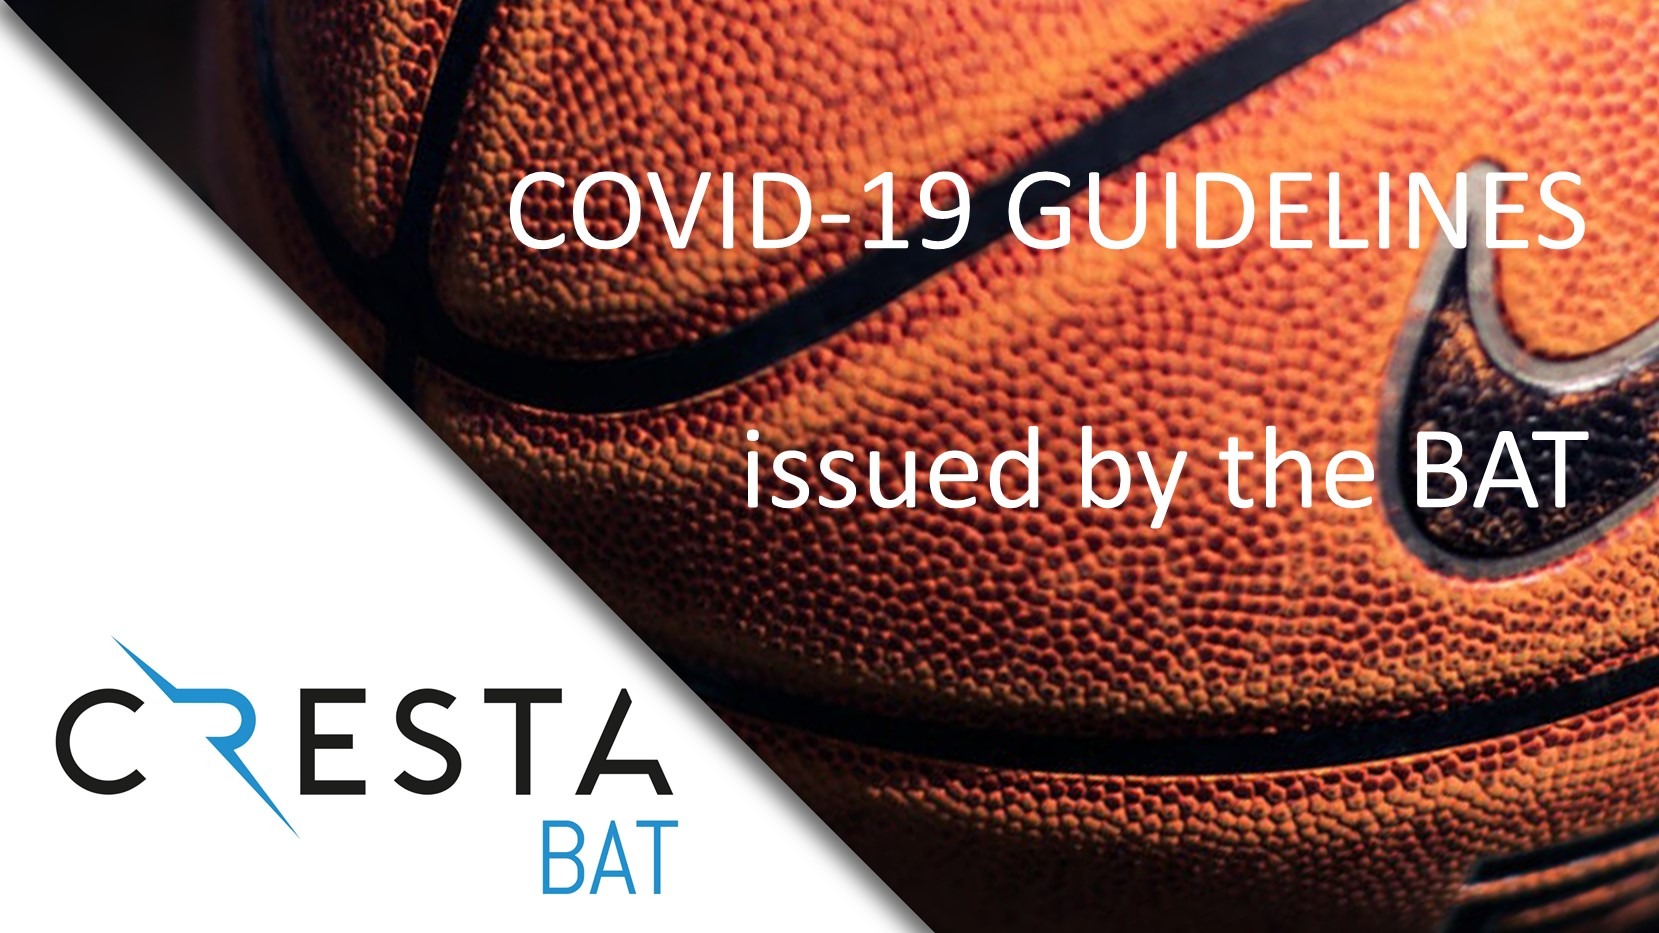 BAT’s COVID-19 guidelines